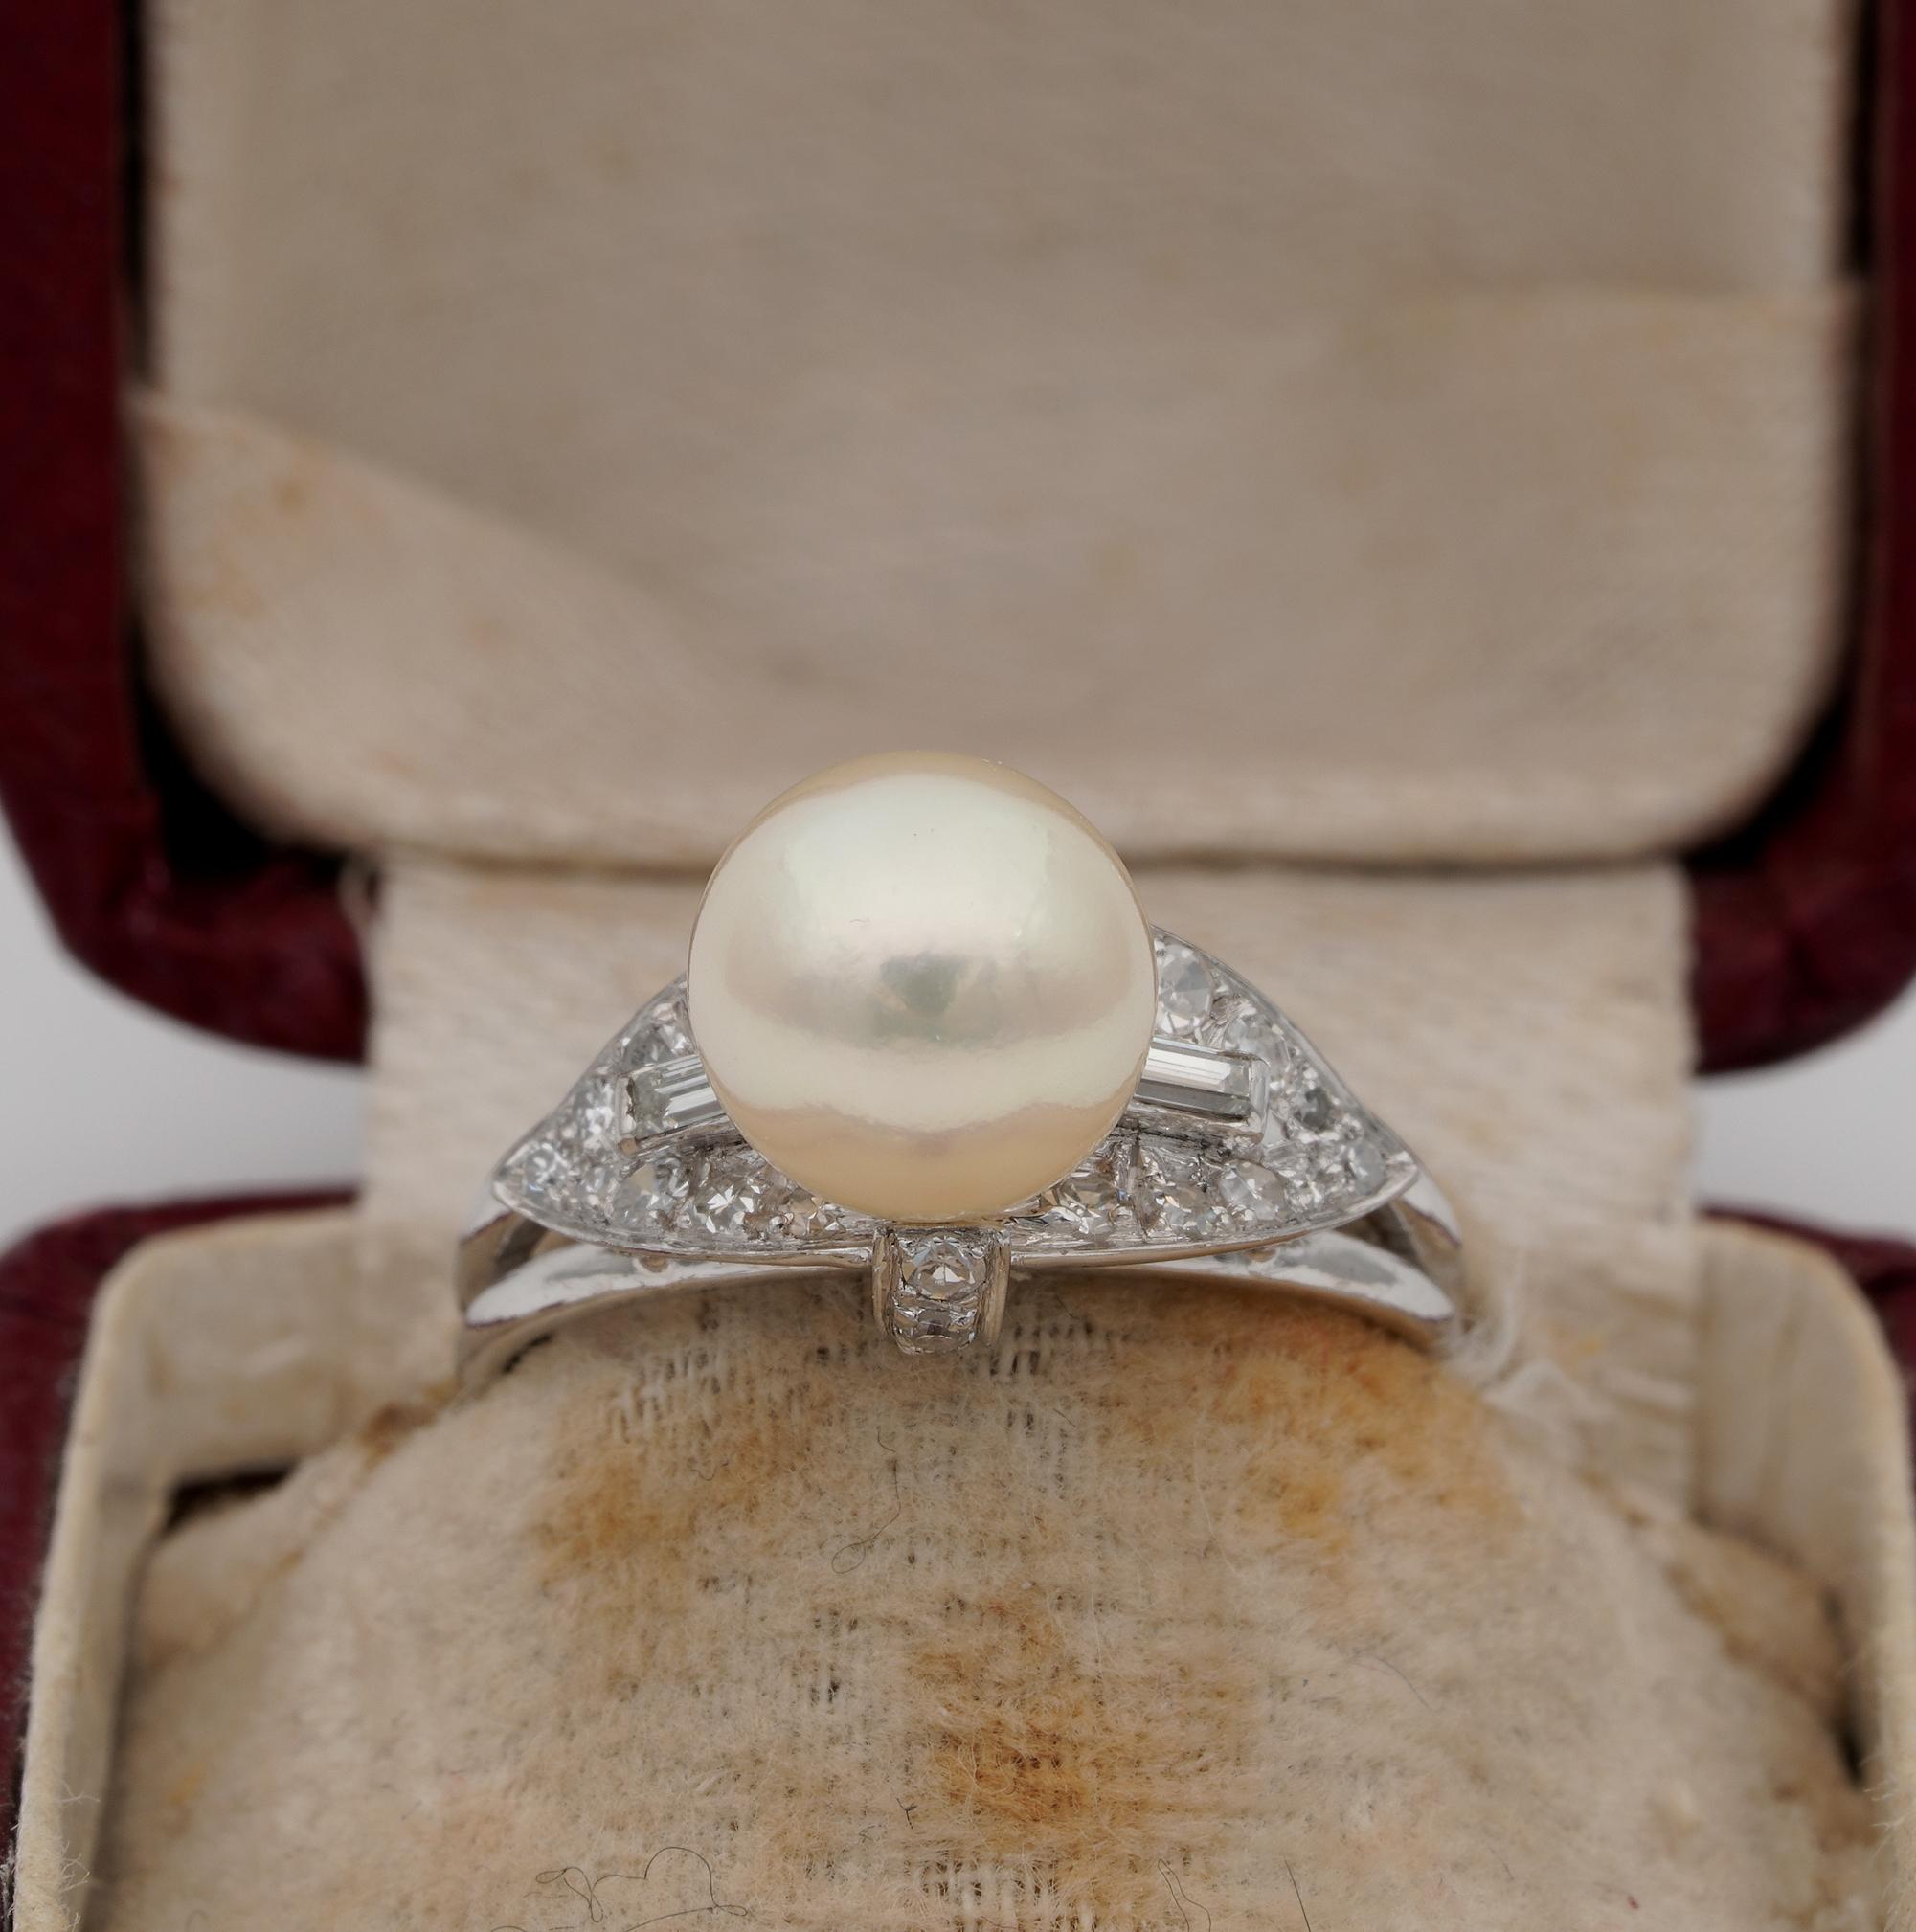 Her Majestic the Pearl
Elegantly designed and crafted is this beautiful mid century Pearl Solitaire ring complemented by Diamonds
post 1960 ca, hand crafted of solid Platinum marked
Articulate in design showing geometric shoulders and sinuous up